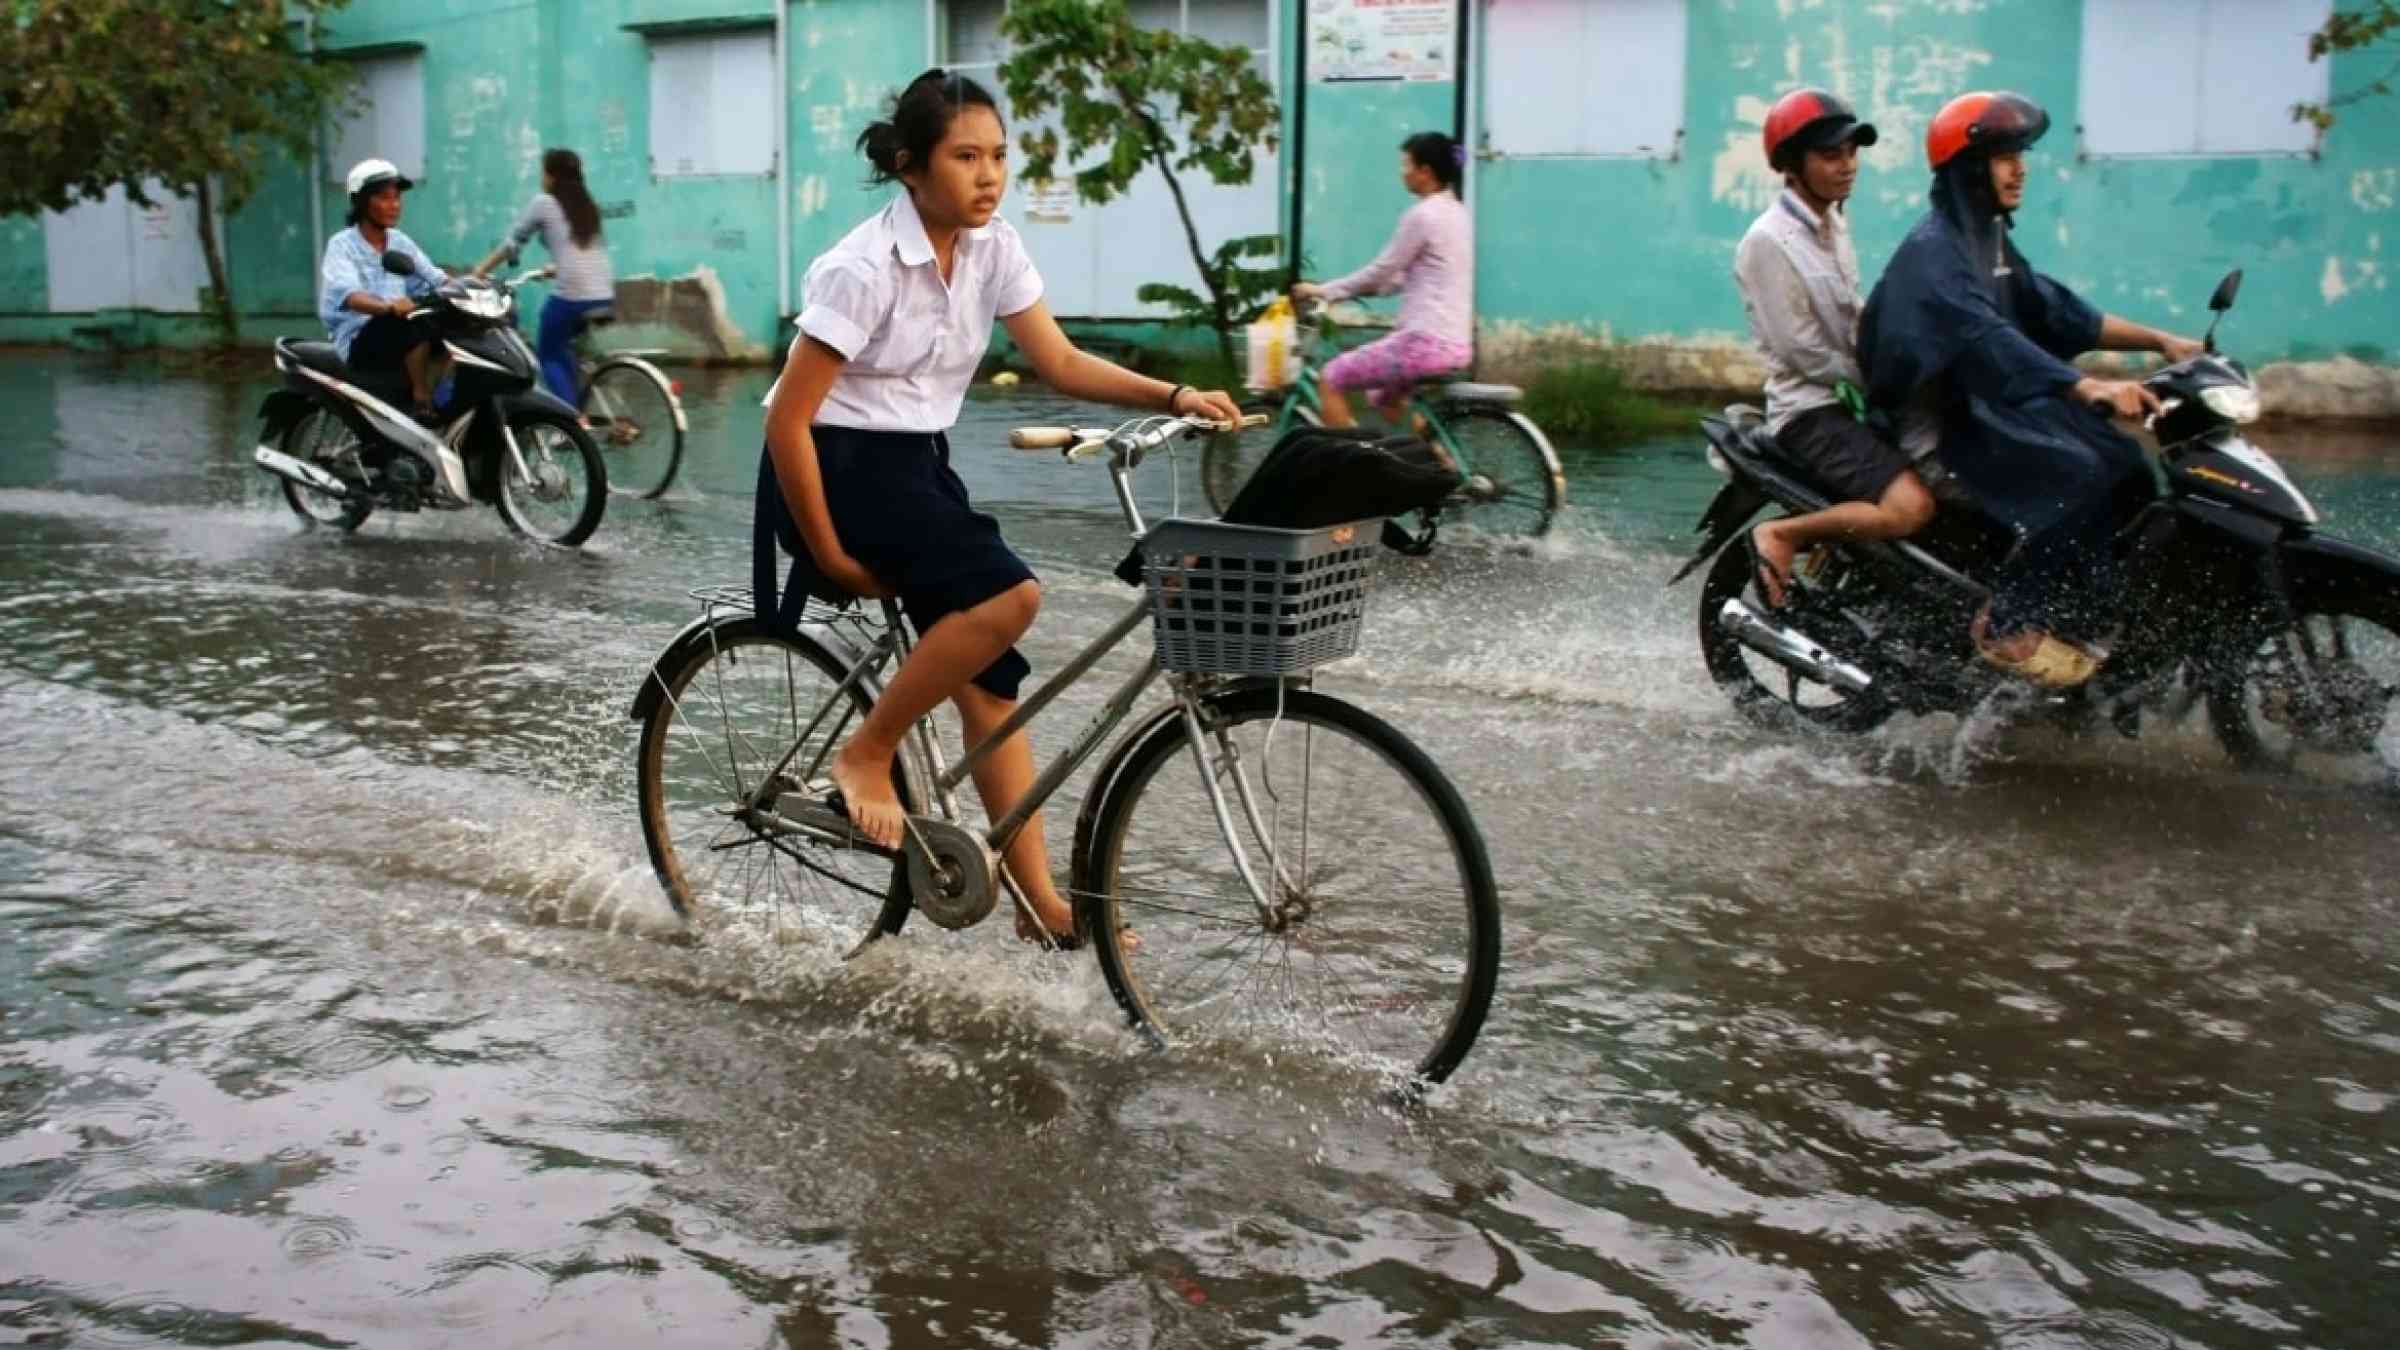 A Vietnamese school girl bikes through the flooded streets in Ho Chi Minh wearing her school uniform.